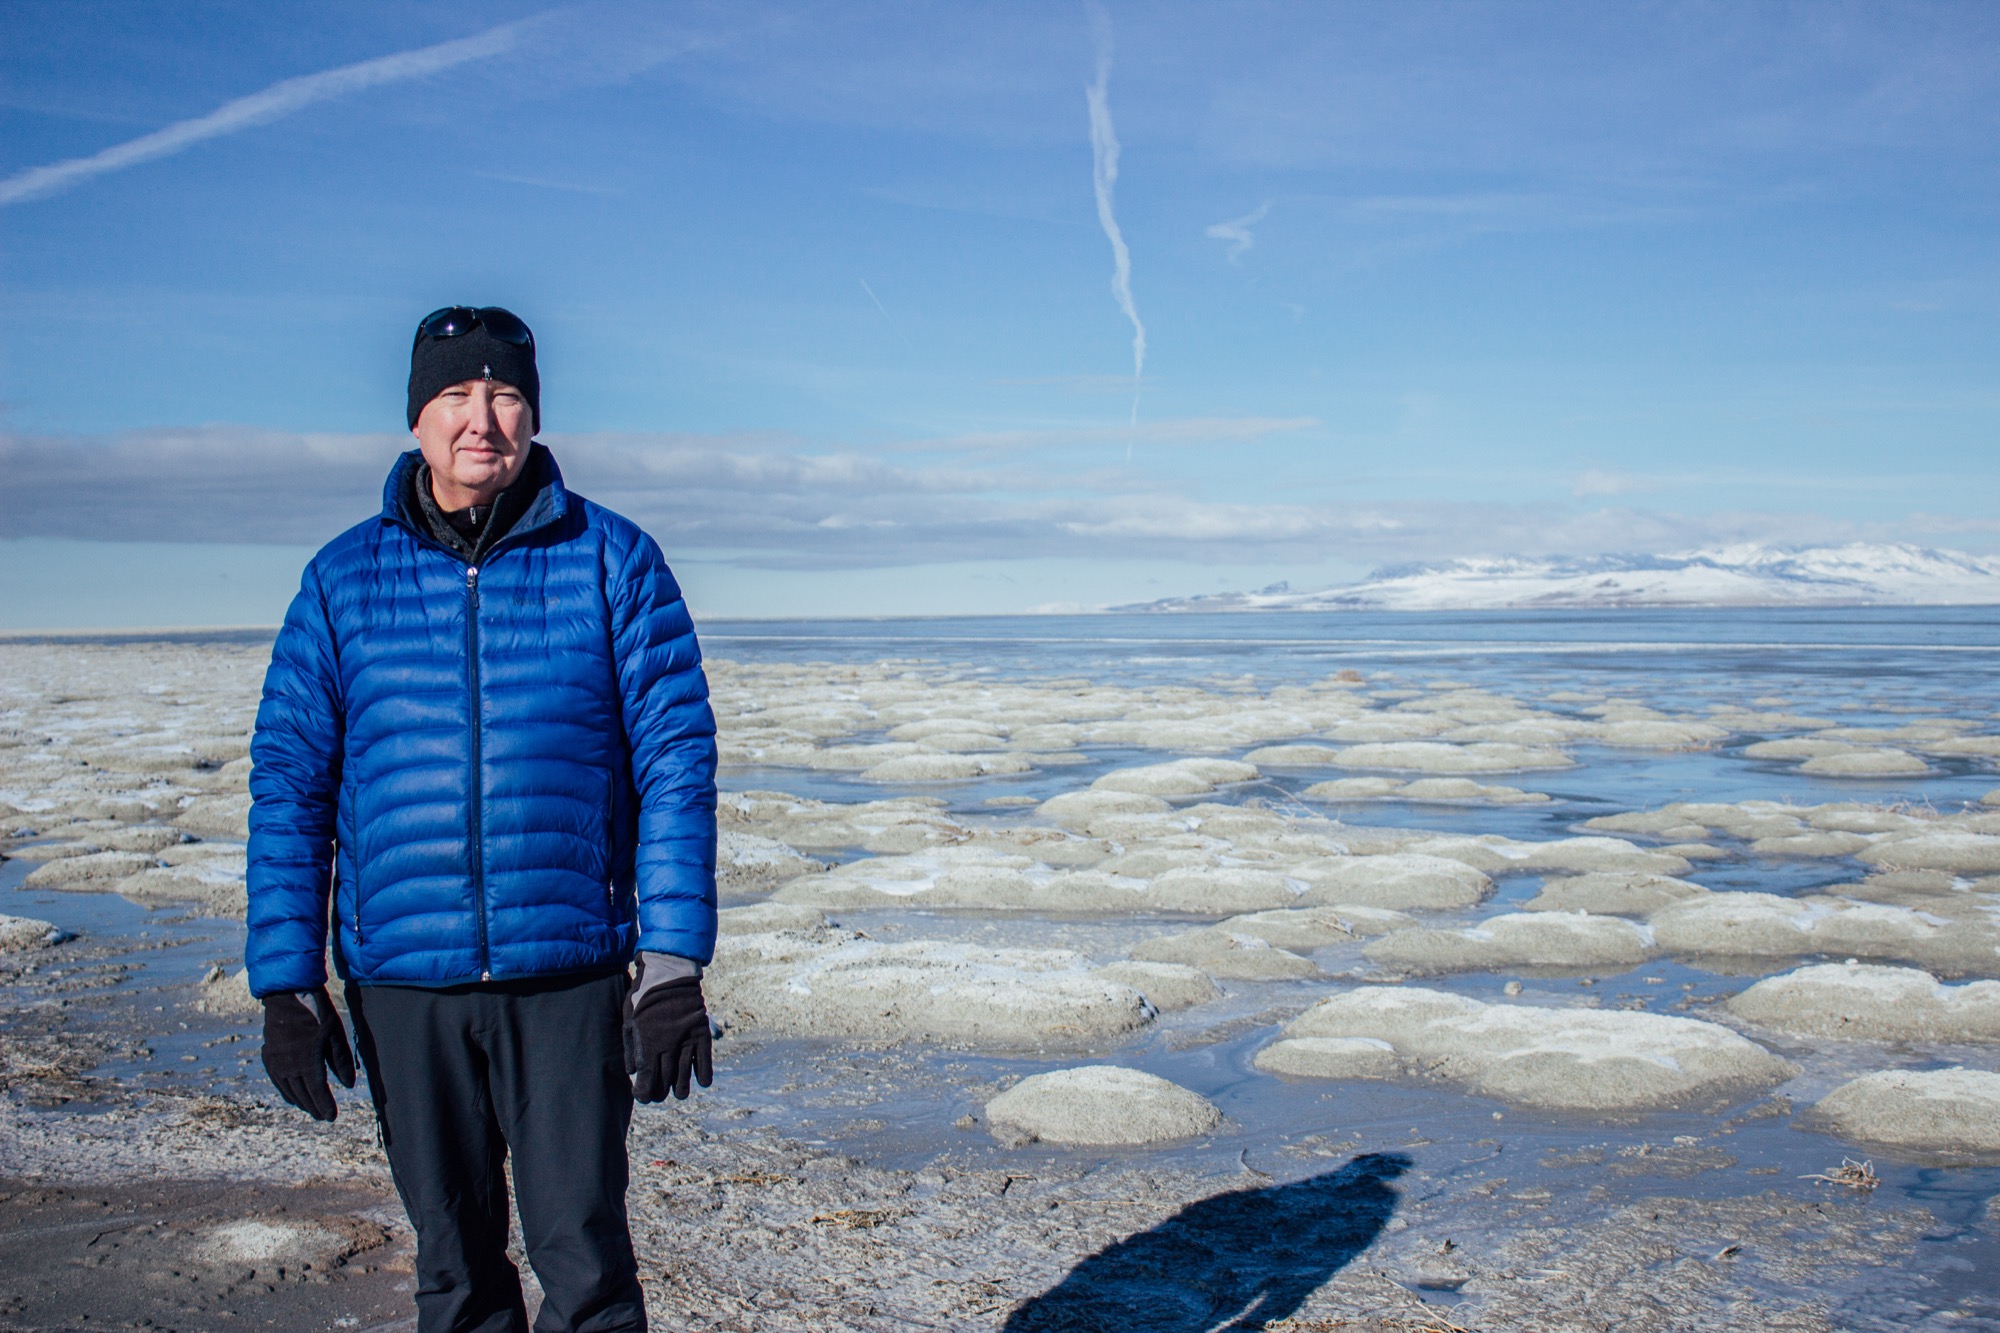 Kevin Perry at the great salt lake in front of dried microbialite communities, Utah